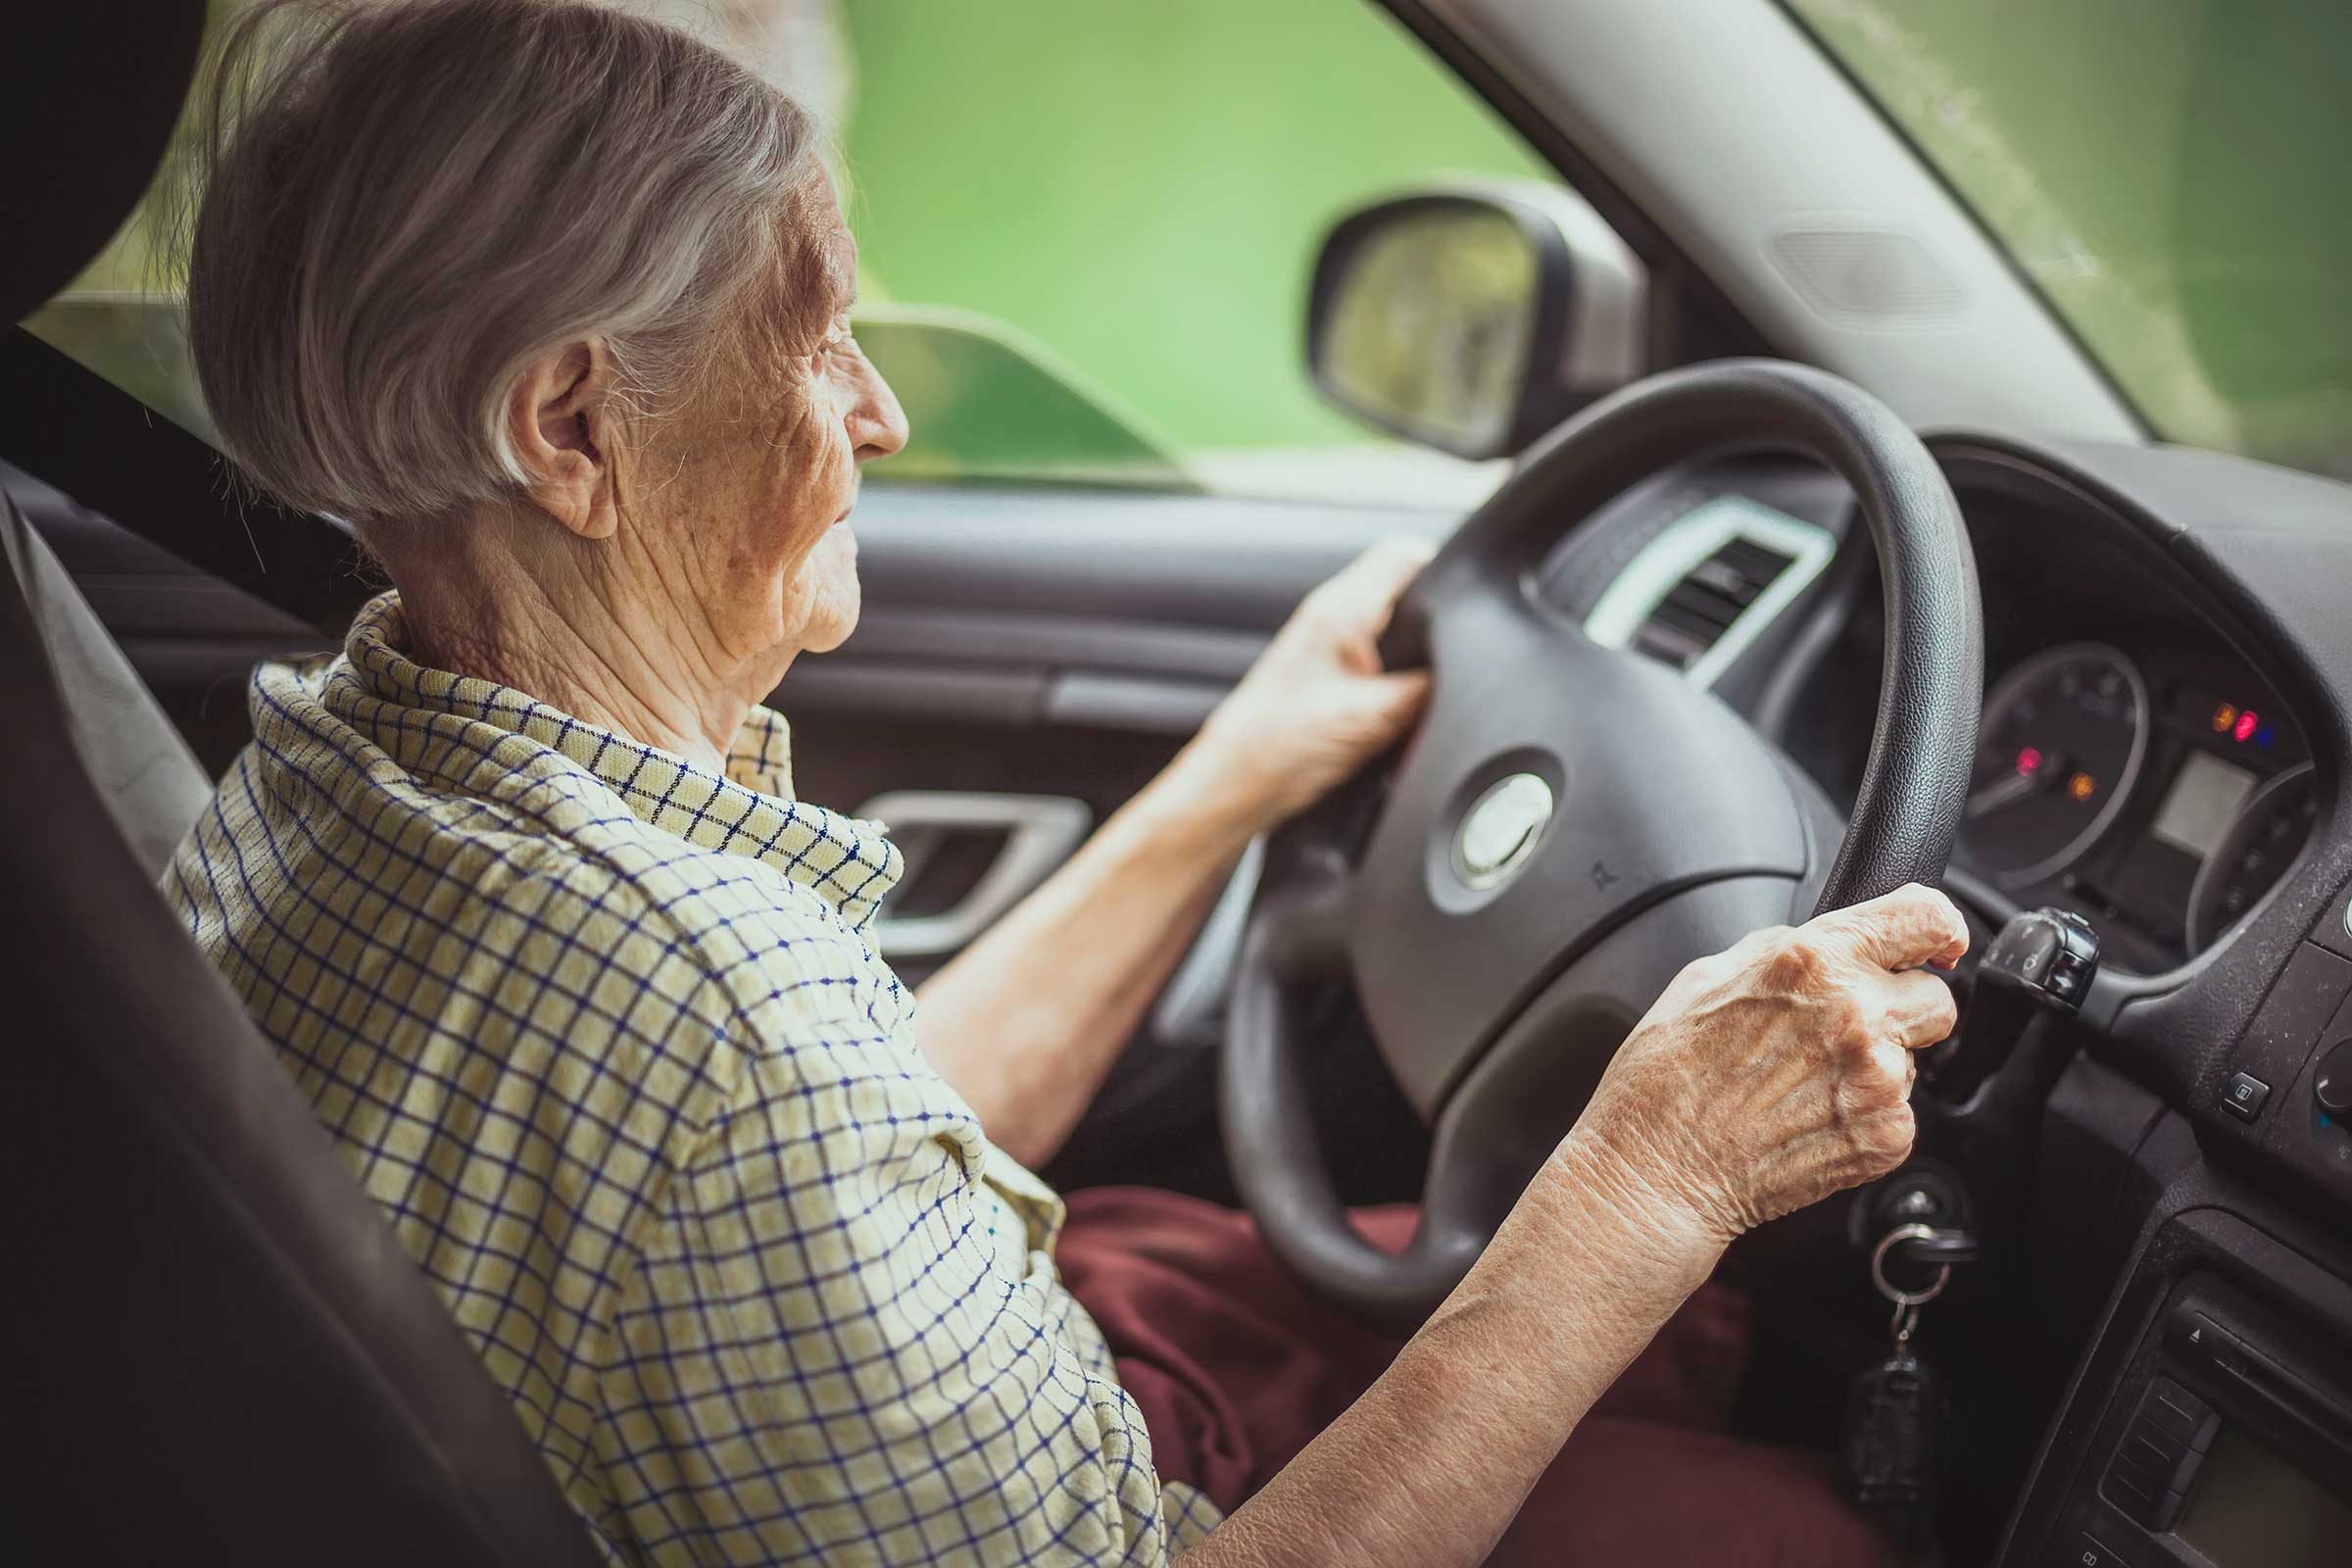 Elderly Drivers: When Should They Stop Driving?